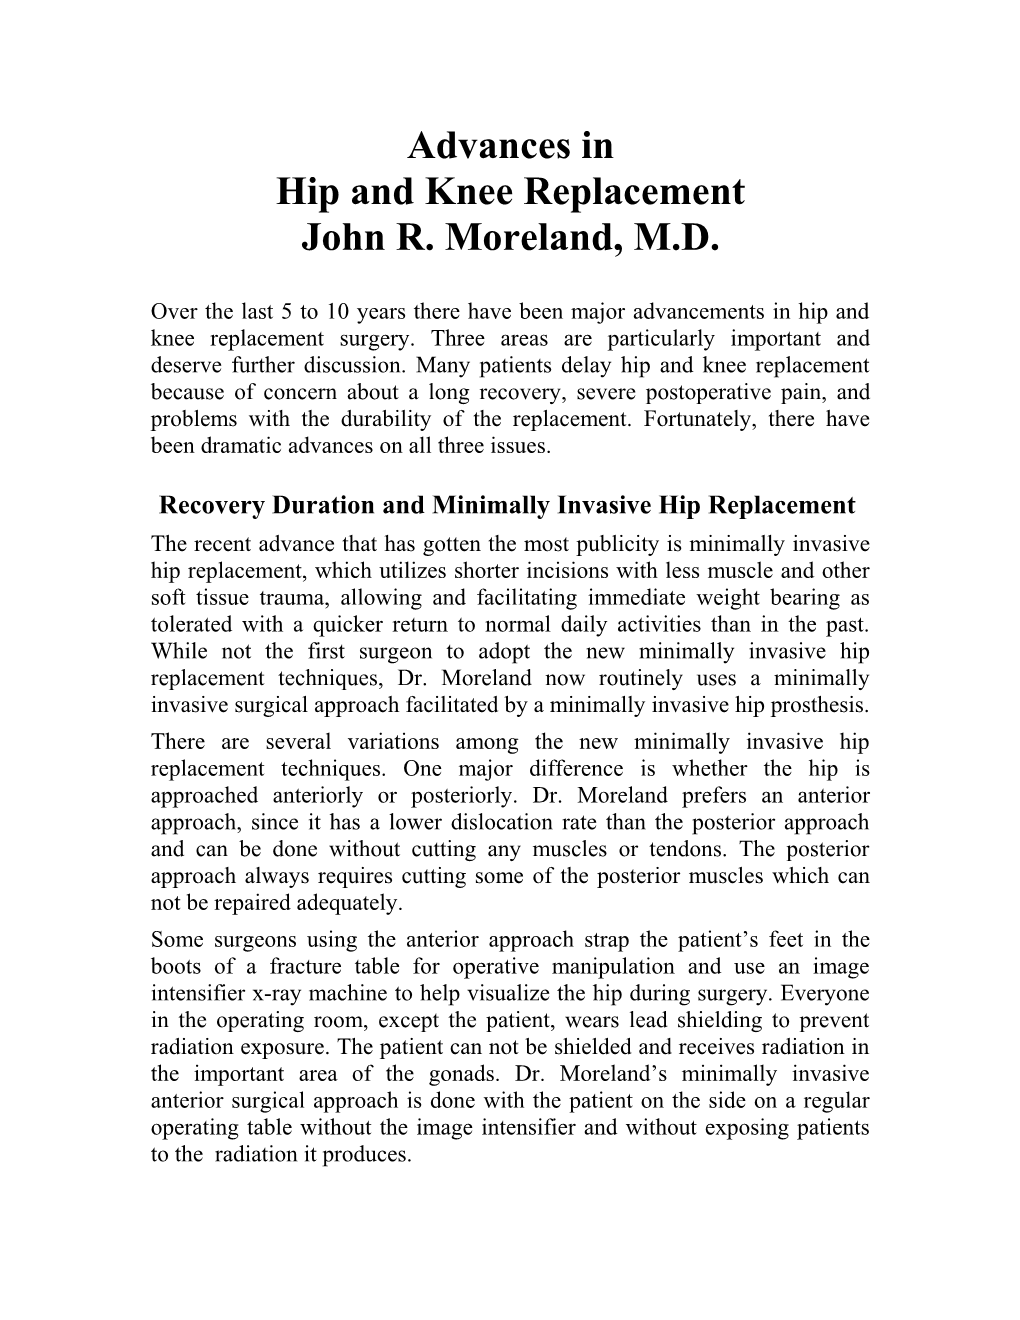 Recent Advances in Hip Replacement